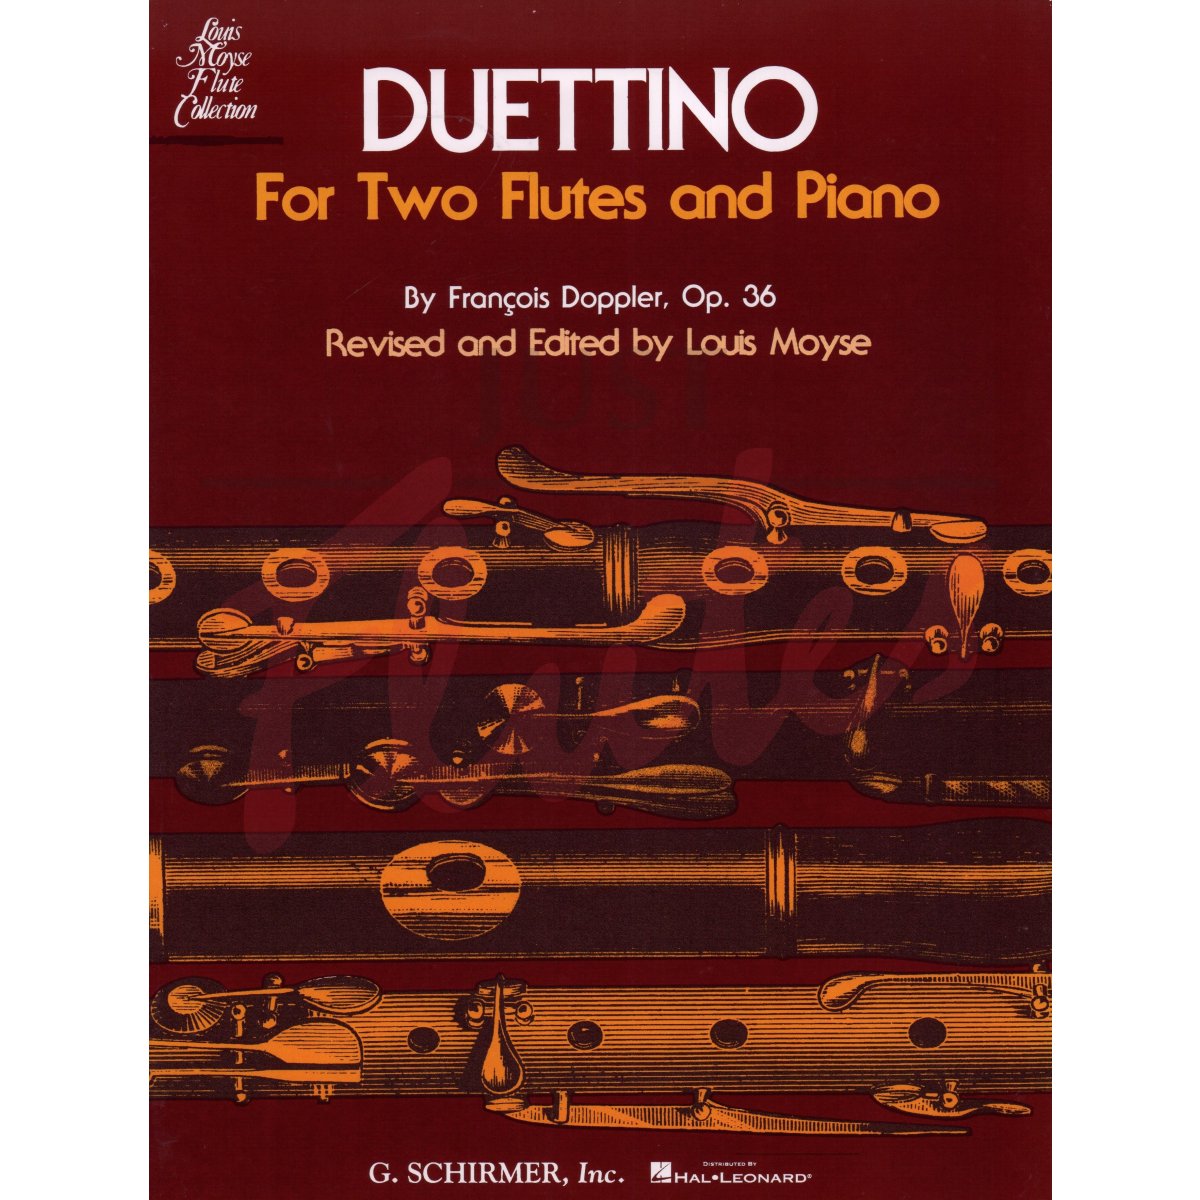 Duettino for Two Flutes and Piano